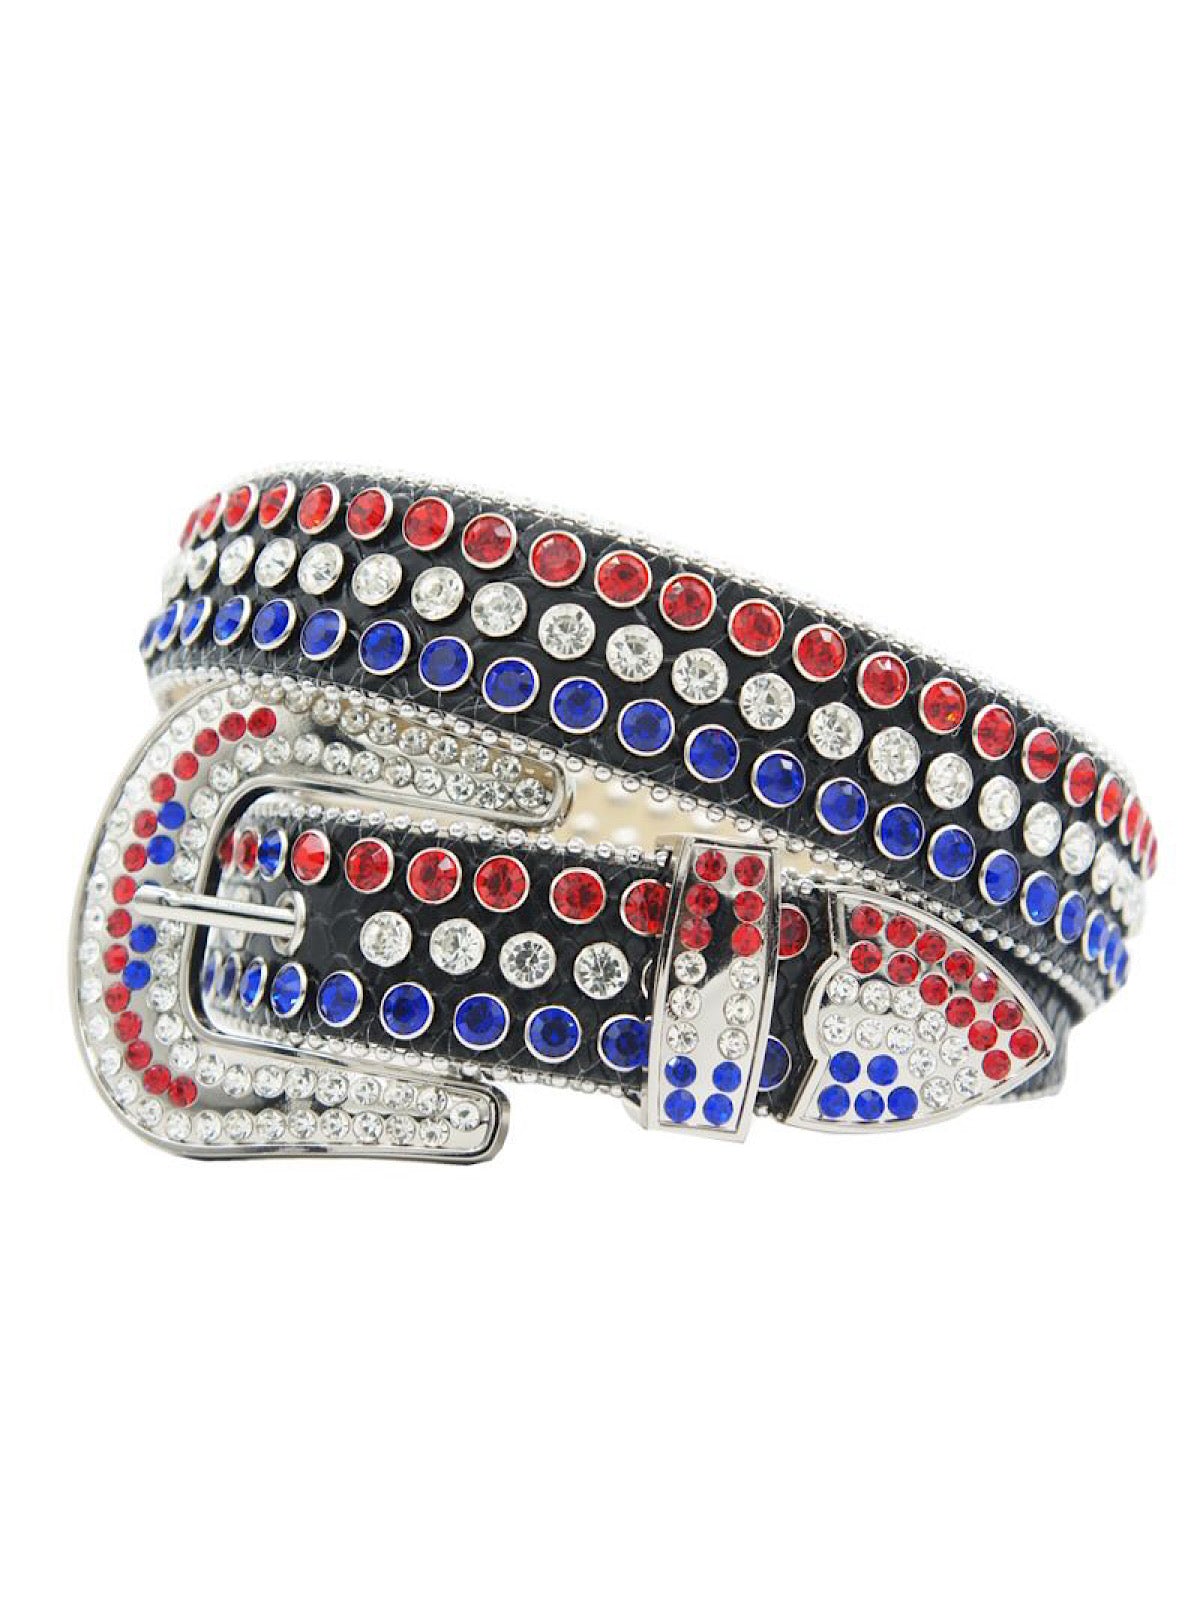 DNA Leather Belt W/Stones-Red/White/Royal